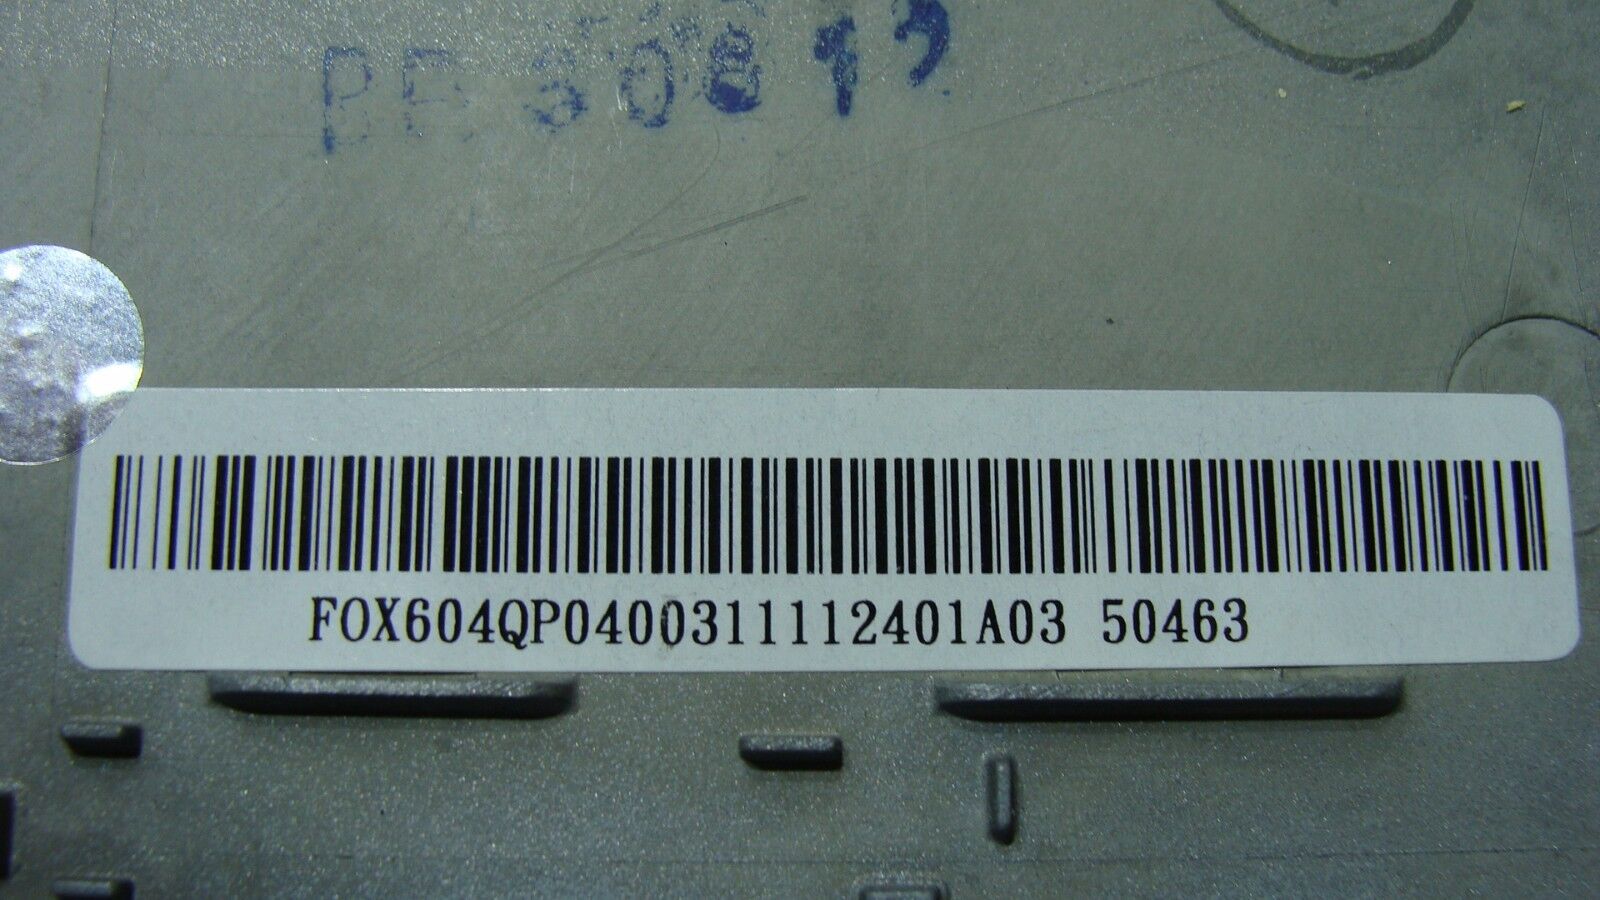 Acer S3-951-6646 13.3